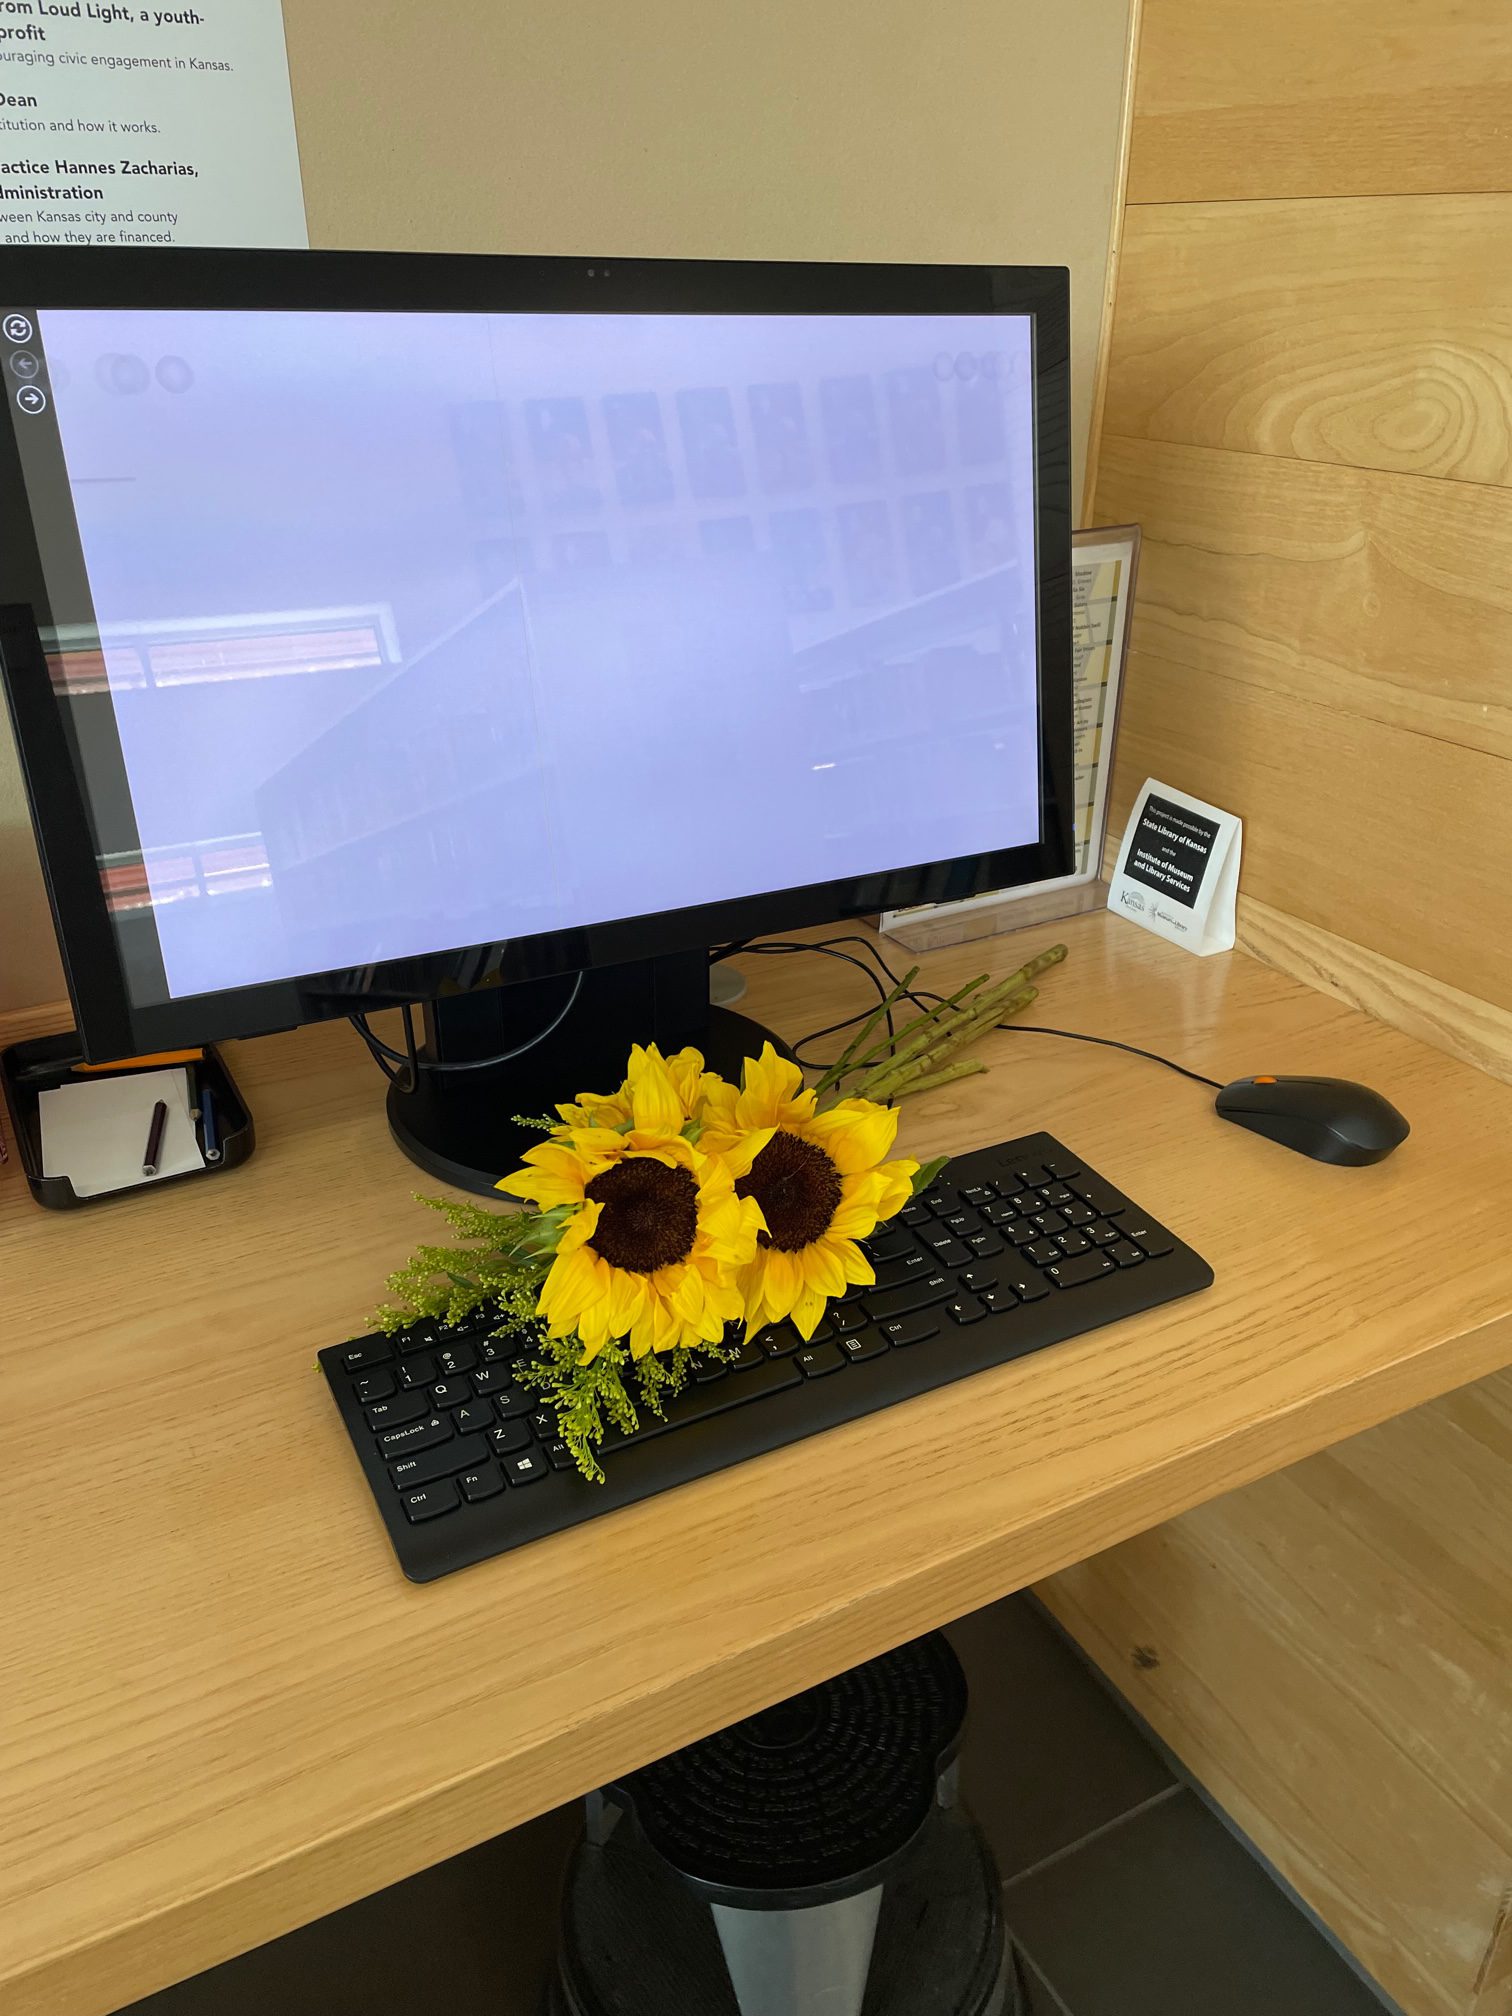 Library computer with sunflowers